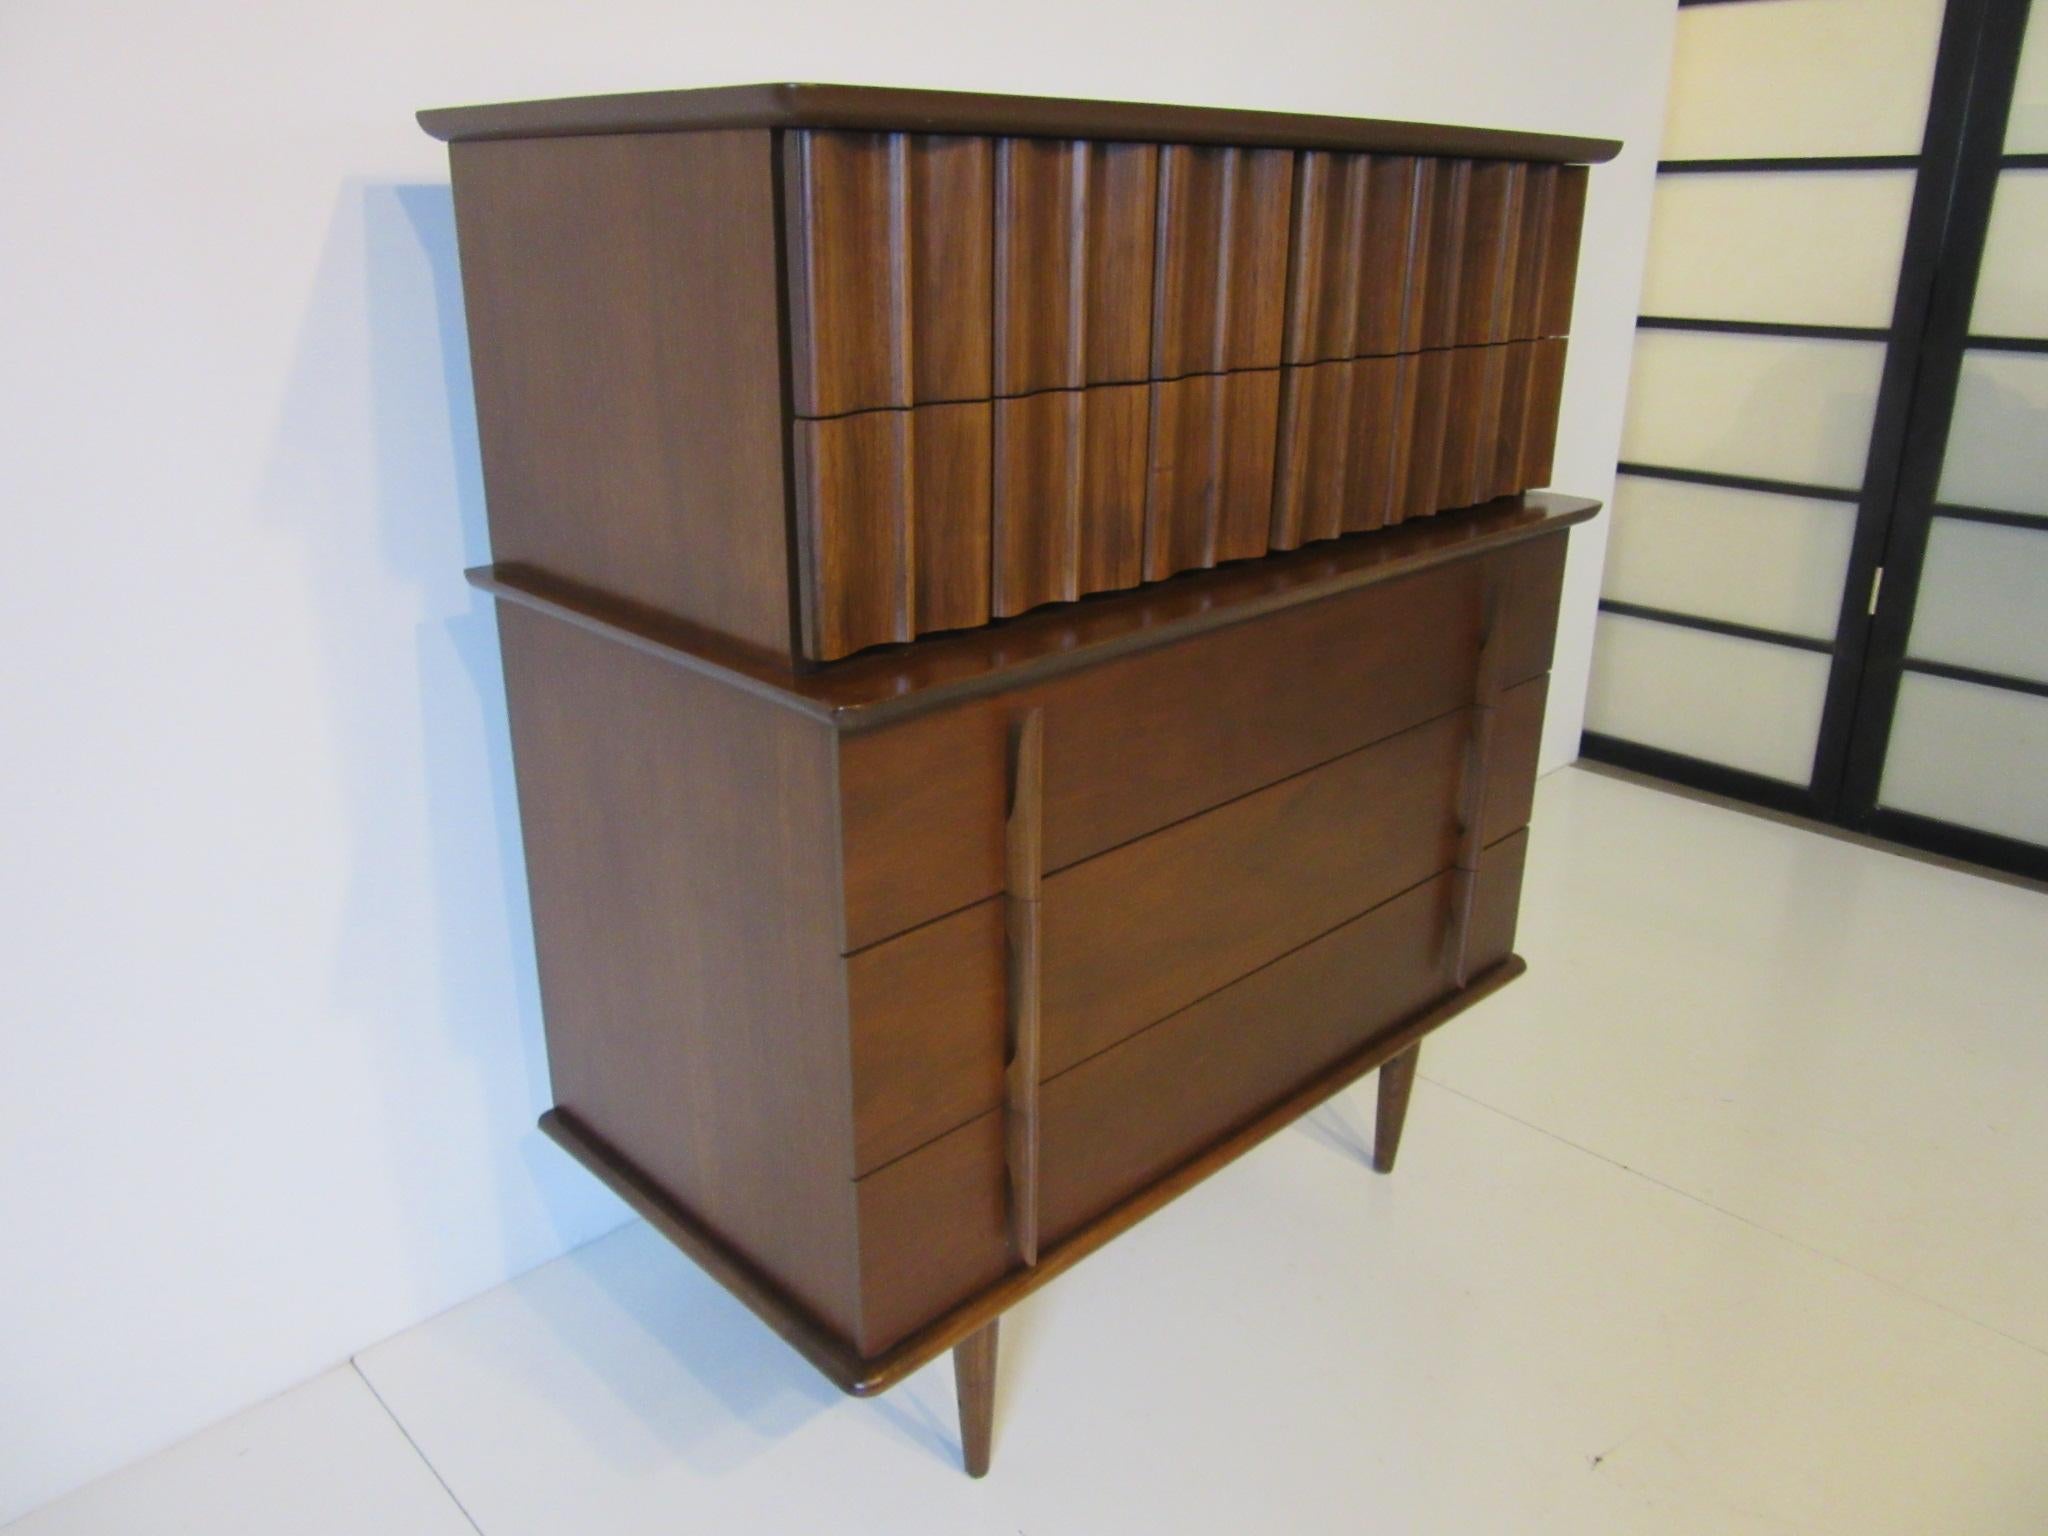 A dark walnut toned tall dresser with great sculptural handles and drawer fronts, an interesting take on an old chest on chest design transferred to a midcentury vibe with plenty of storage.